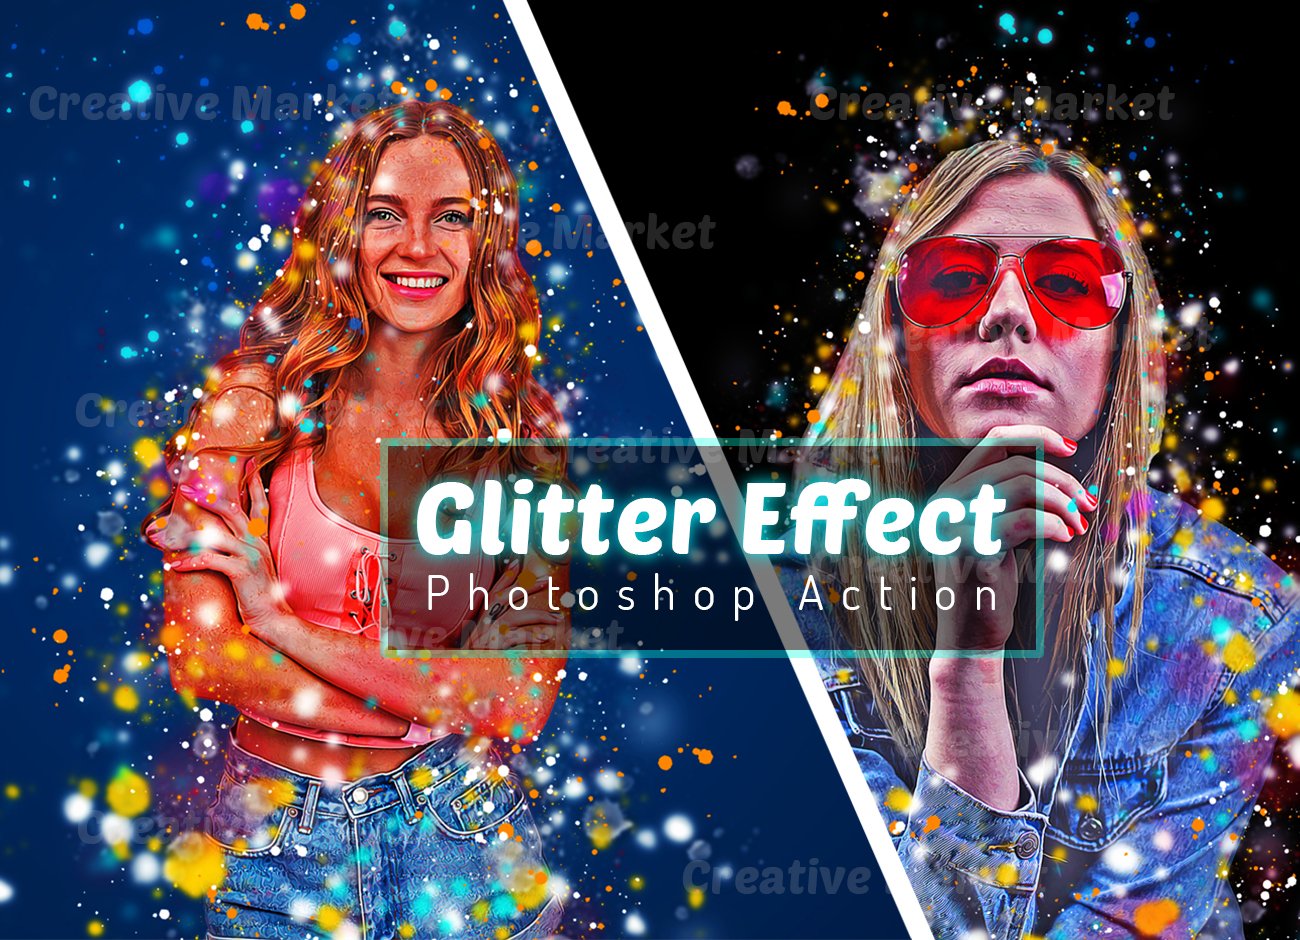 Glitter Effect Photoshop Actioncover image.